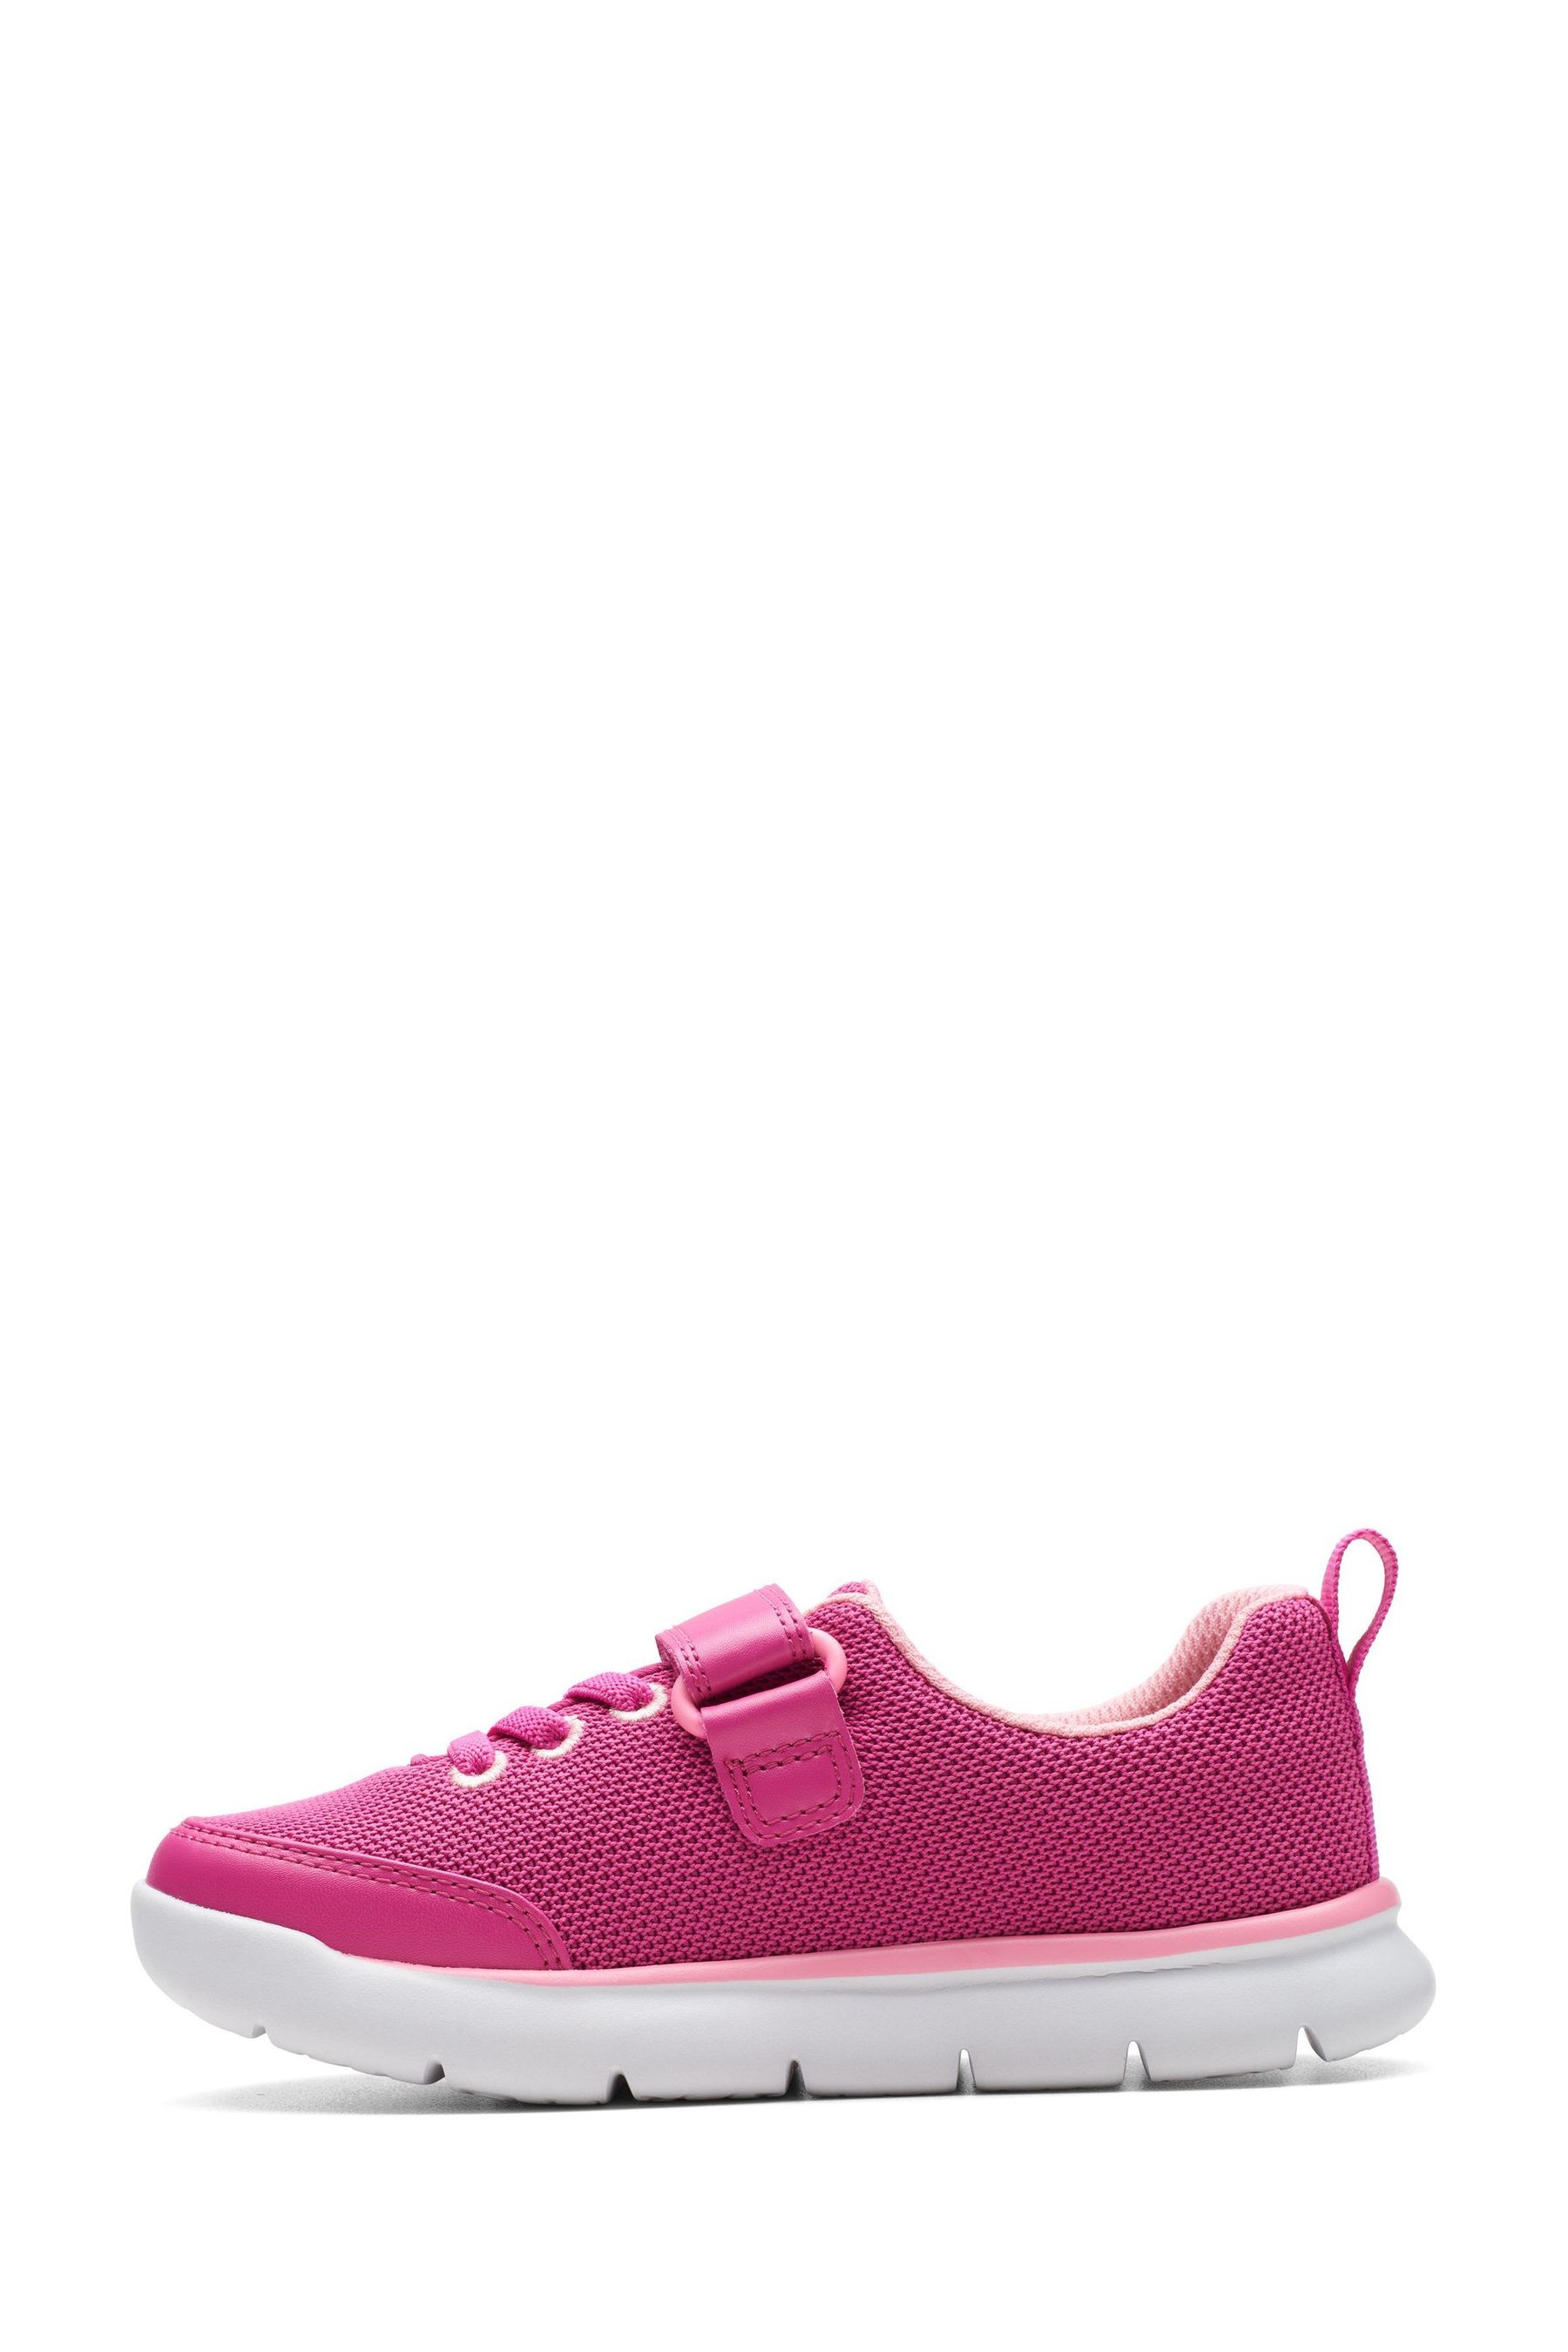 Buy Clarks Pink Multi Fit Kids Hoop Run Trainers from the Next UK ...